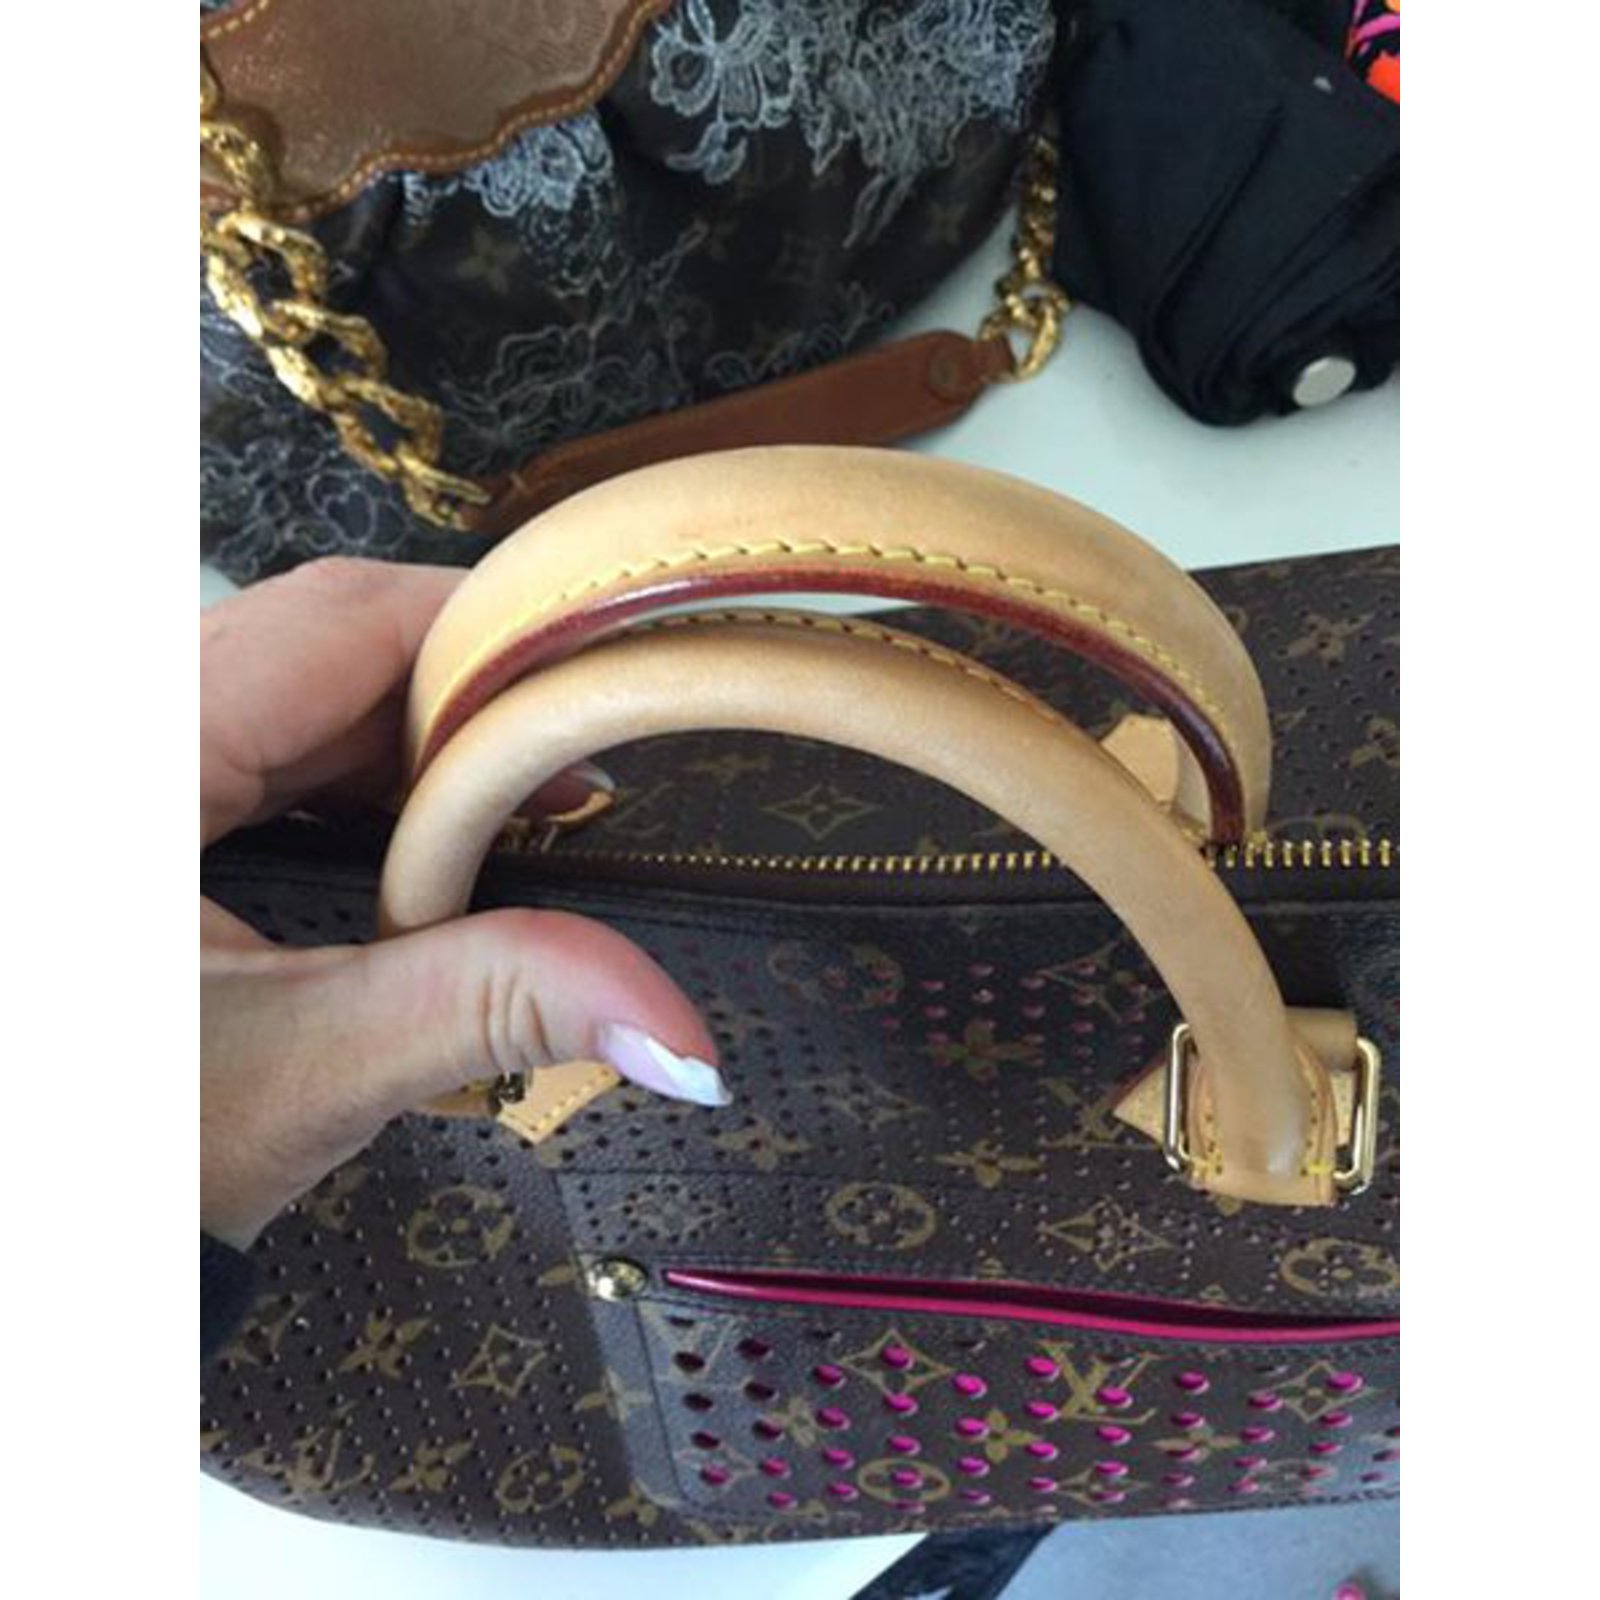 Louis Vuitton Speedy 30 Perforated Pink Limited Edition